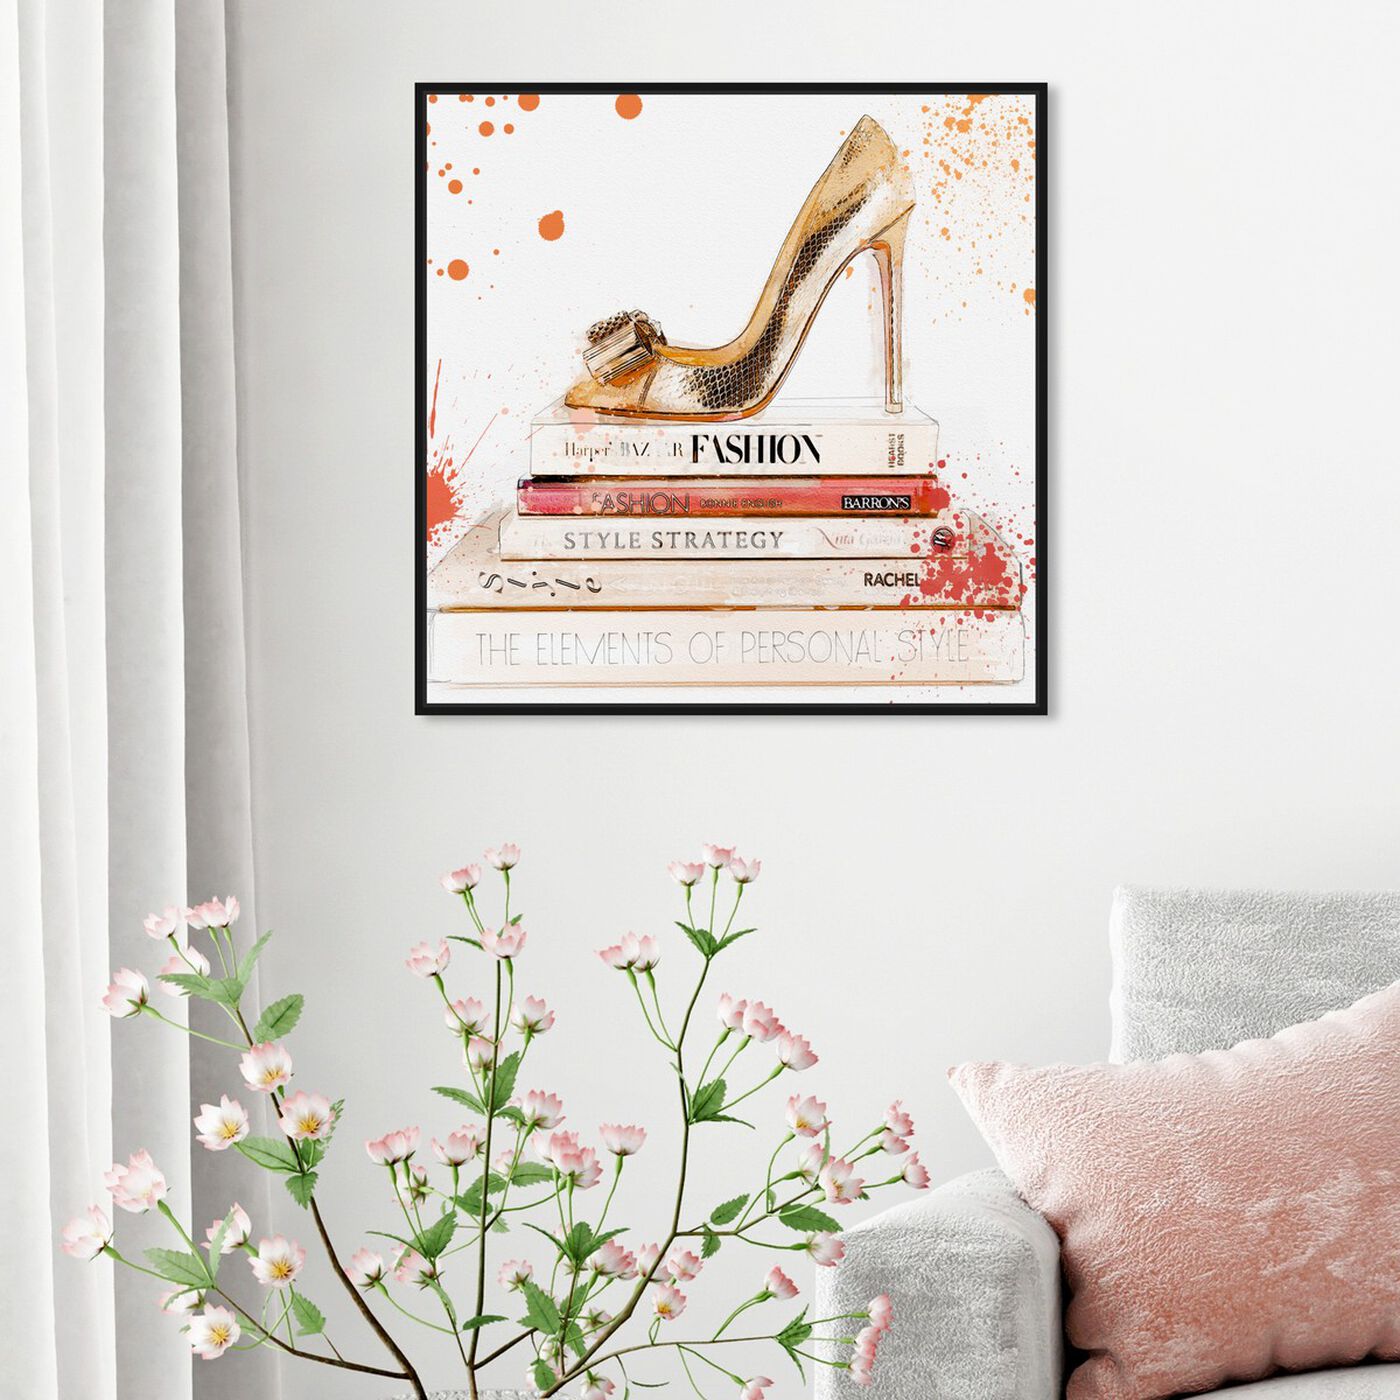 Hanging view of Coral Shoe and Books featuring fashion and glam and shoes art.